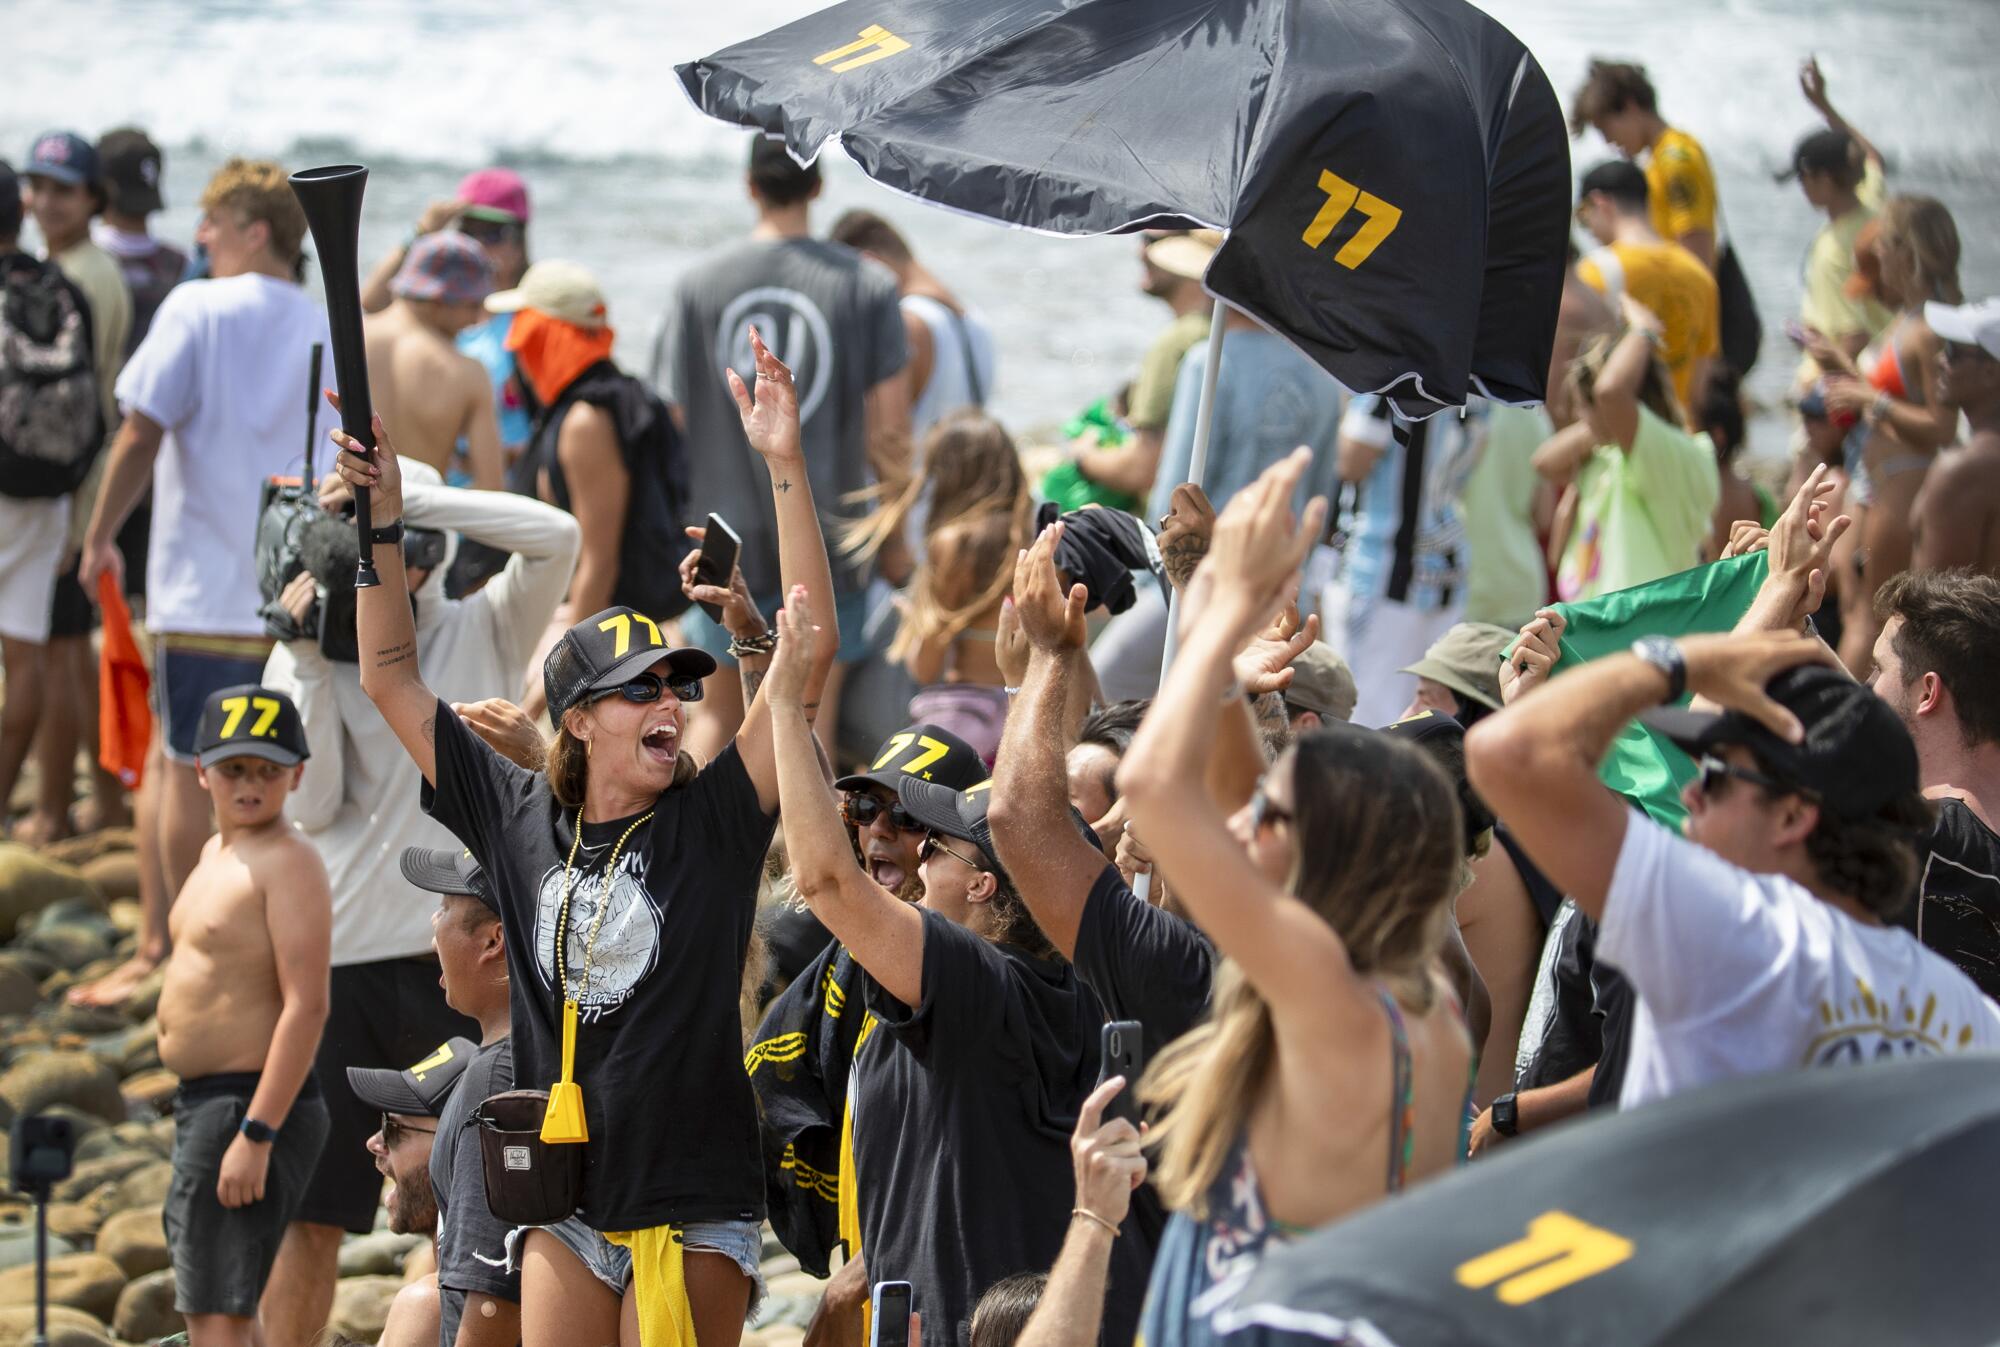 Fans cheer as Filipe Toledo competes in the championship round of the WSL Finals.